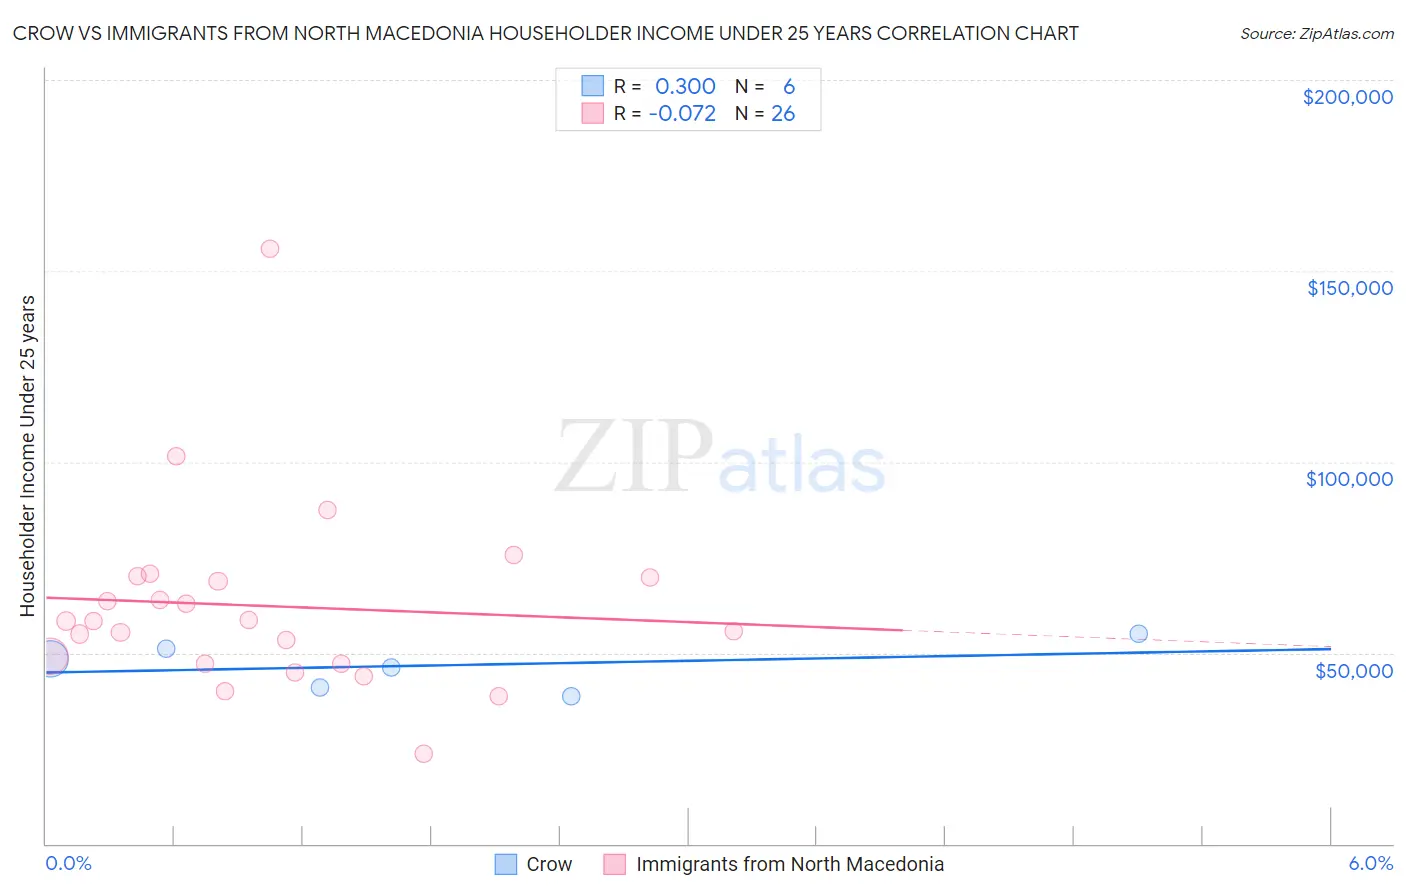 Crow vs Immigrants from North Macedonia Householder Income Under 25 years